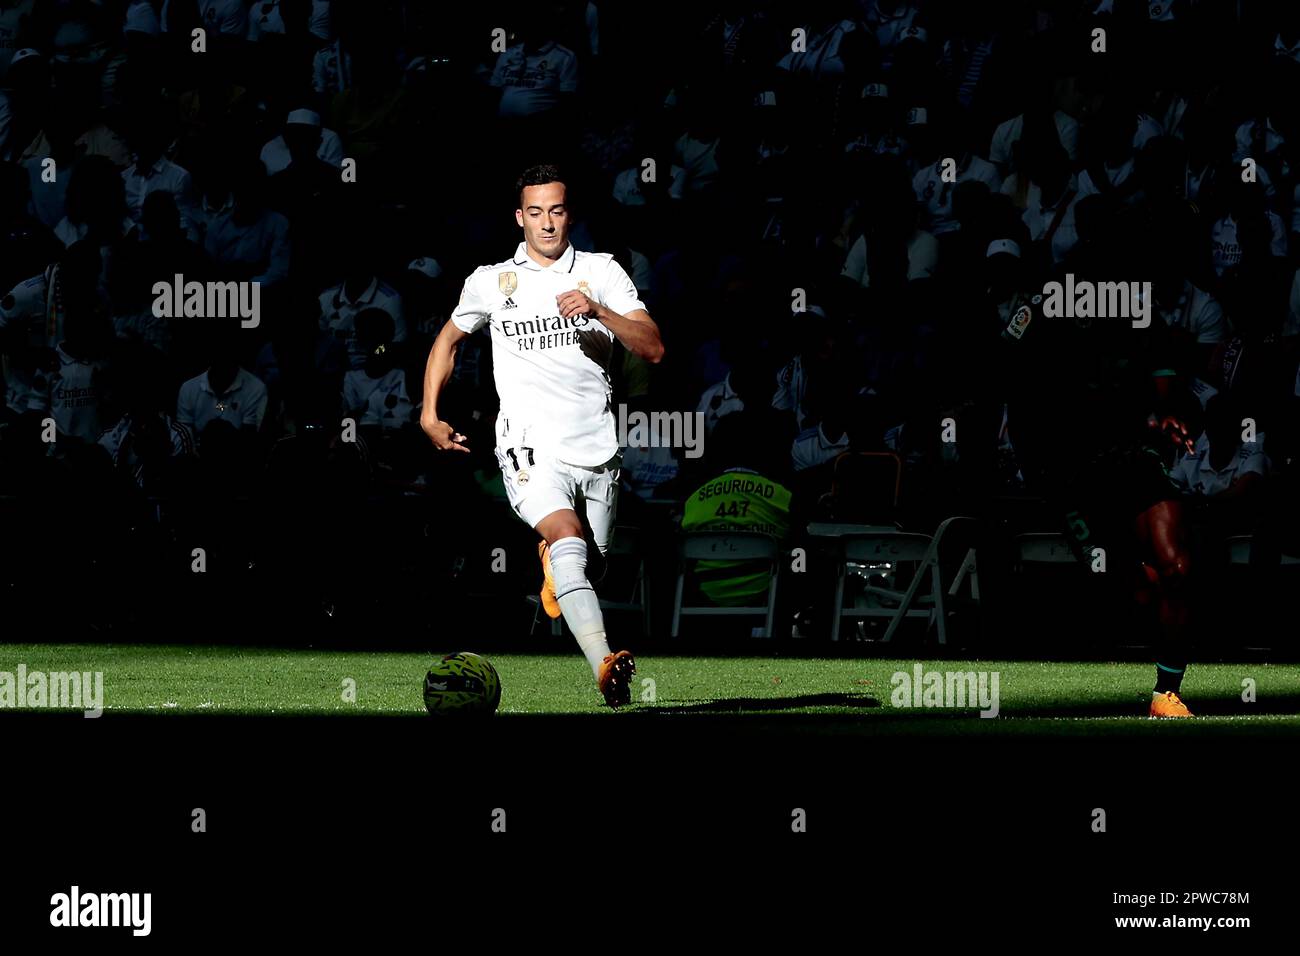 Madrid, Spain. 29th Apr, 2023. Madrid, Spain, 29.04.2023.- Real Madrid player Vazquez. Real Madrid vs Almeria match of the Spanish Soccer League on matchday 32 held at the Santiago Bernabeu Stadium in the capital of the Kingdom of Spain. Final result 4-2. Real Madrid goals from Benzema 2 ,17 , 42 (P), Rodrygo 47 . Goals from Almeria Lazaro Vinicius 40' 5, and Lucas Robertone 61' Credit: Juan Carlos Rojas/dpa/Alamy Live News Stock Photo